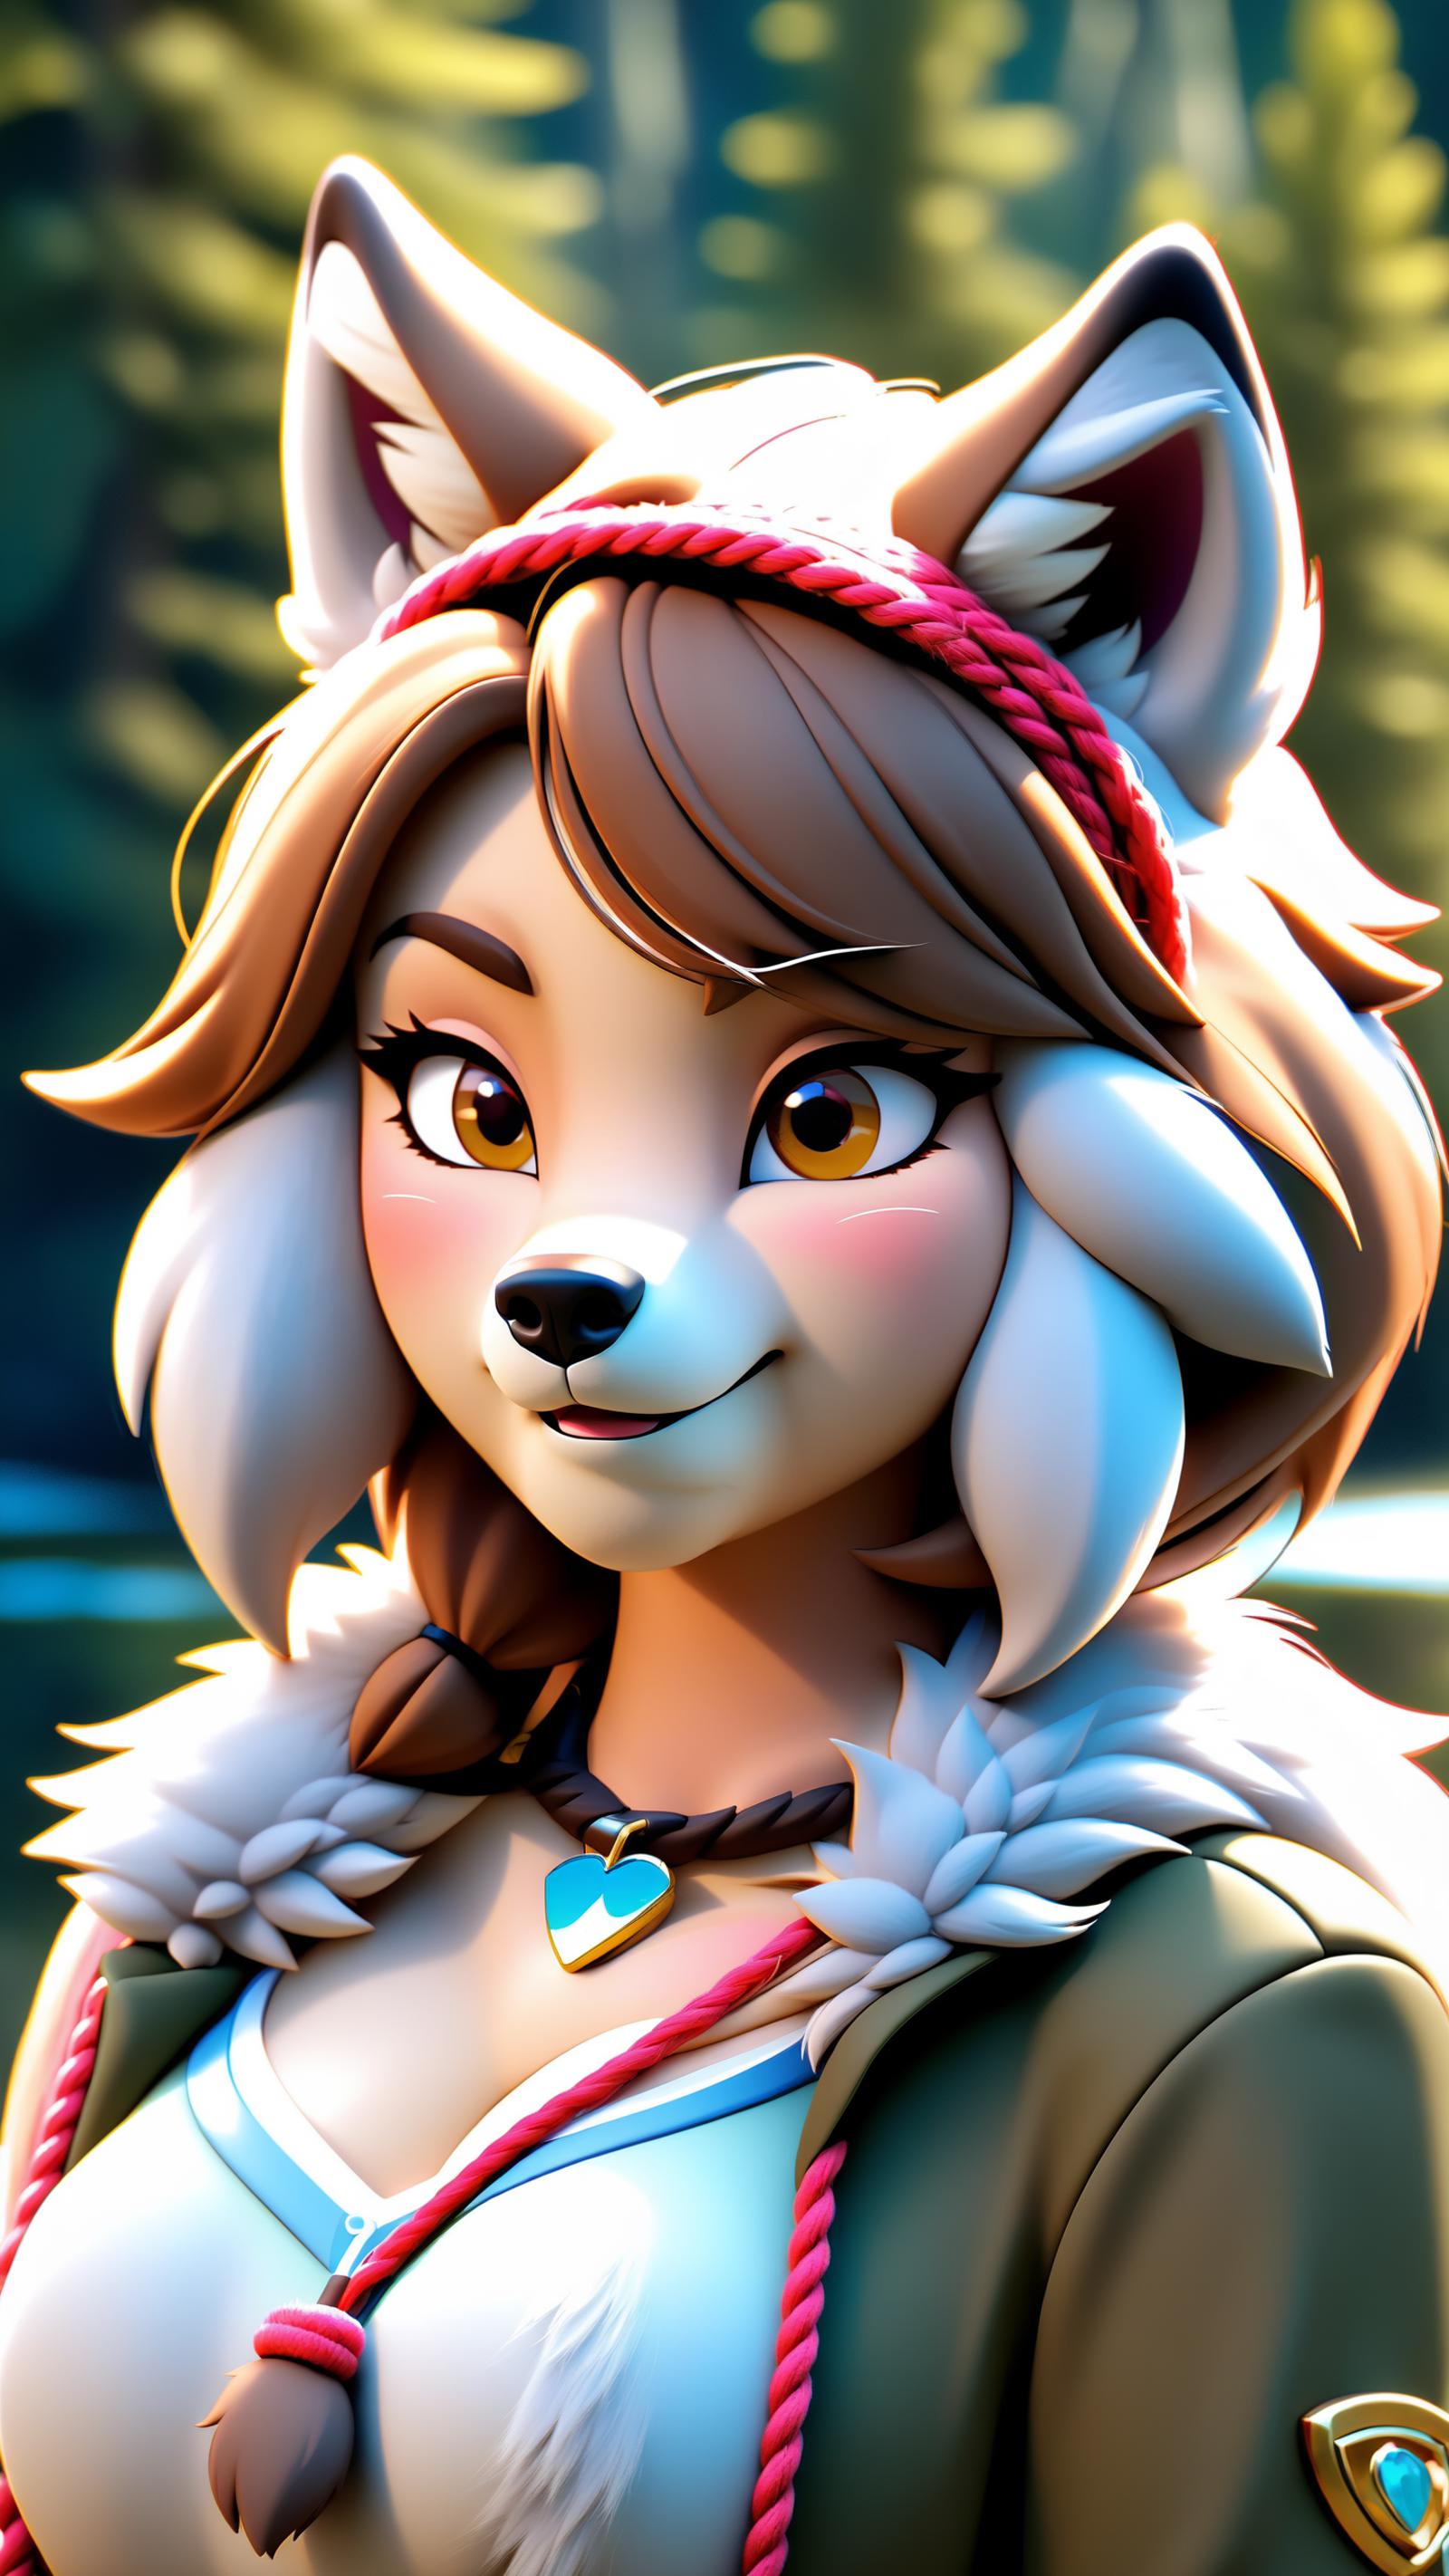 A 3D animated character of a woman with a wolf head, wearing a green jacket and a blue heart necklace.